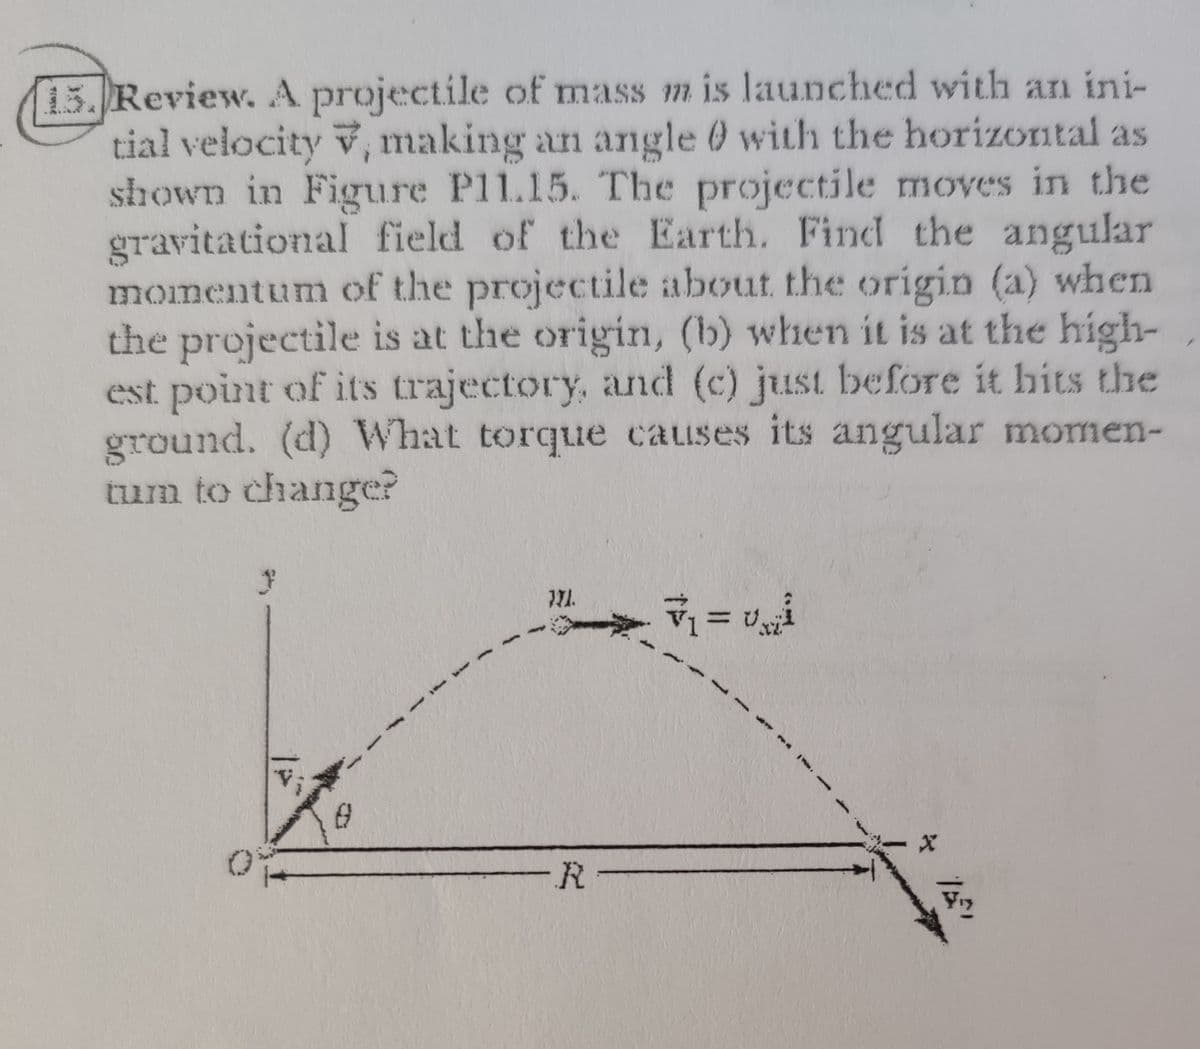 15. Review. A projectile of mass m is launched with an ini-
tial velocity v, making an angle 0 with the horizontal as
shown in Figure Pl1.15. The projectile moves in the
gravitational field of the Earth. Find the angular
momentum of the projectile about the origin (a) when
the projectile is at the origin, (b) when it is at the high-
est point of its trajectory, and (c) just before it hits the
ground. (d) What torque causes its angular momen-
tum to change?
三び
-R-
